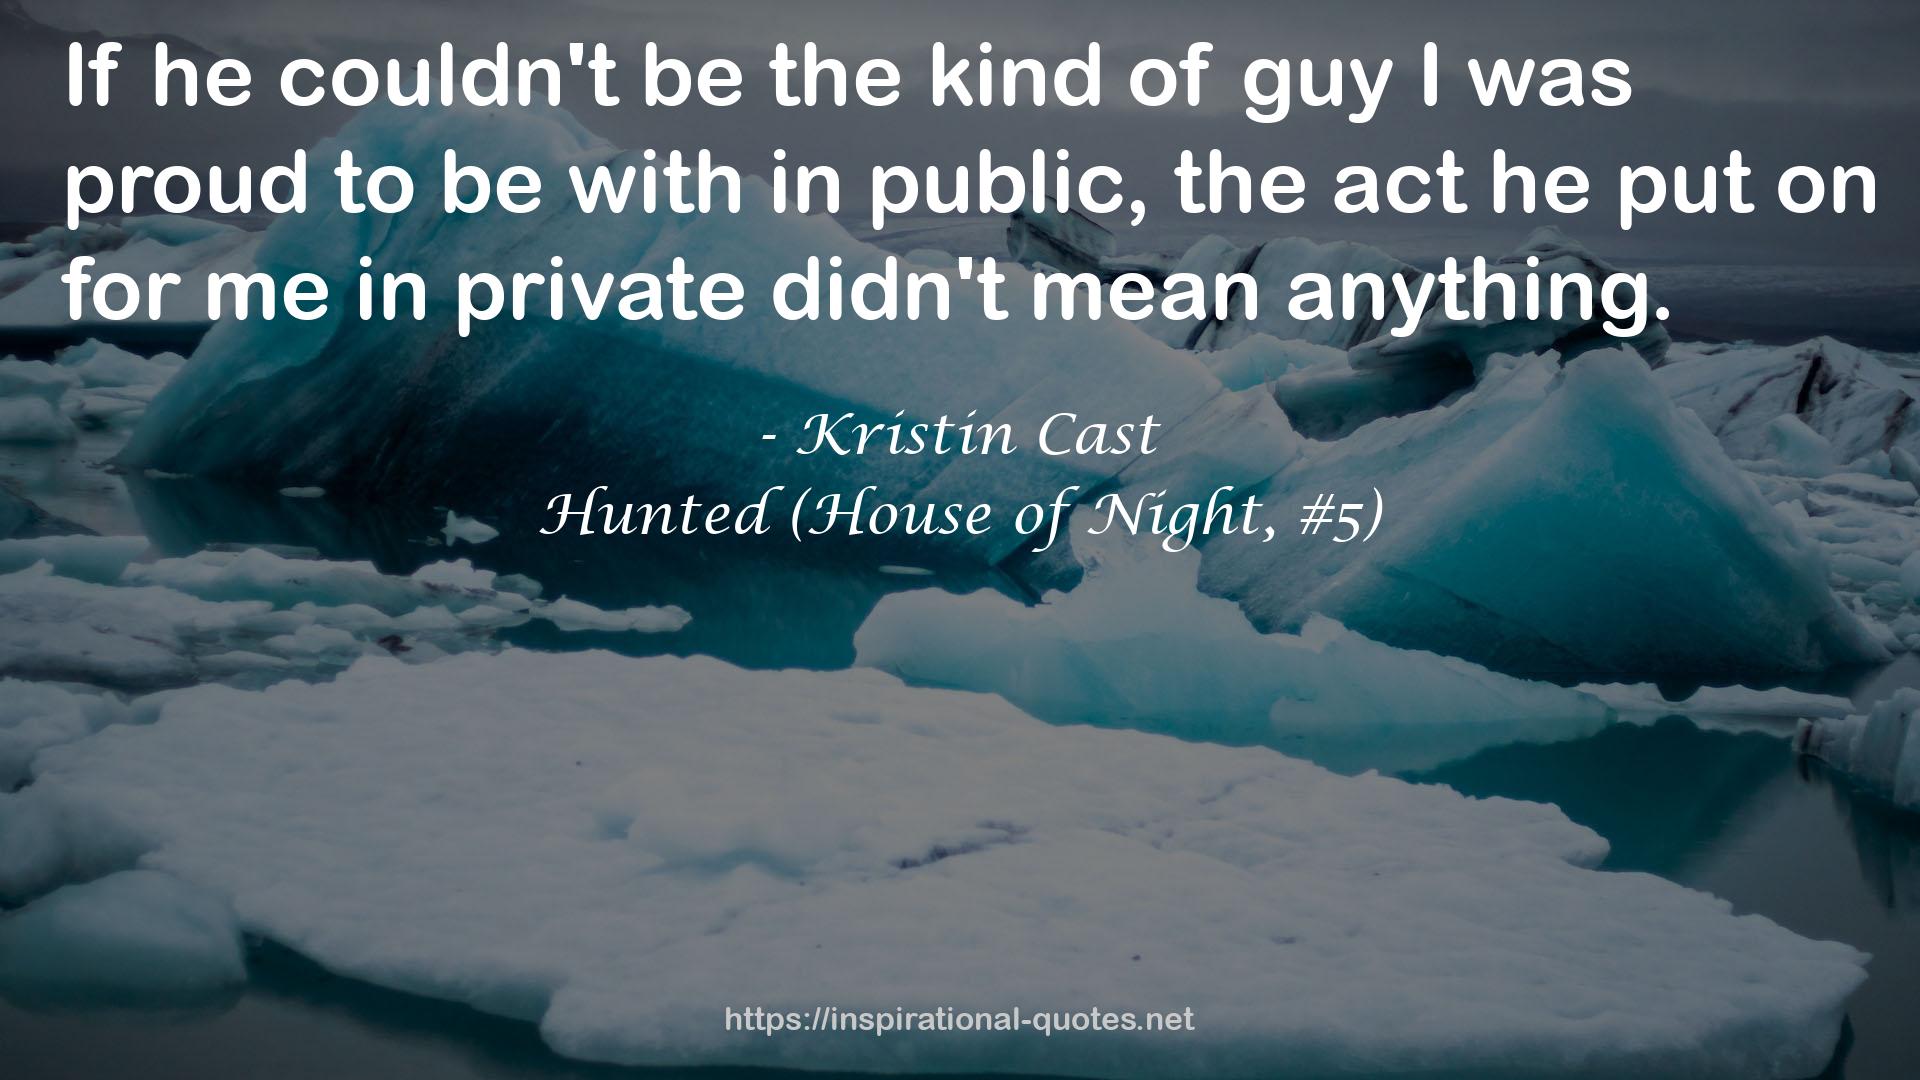 Hunted (House of Night, #5) QUOTES